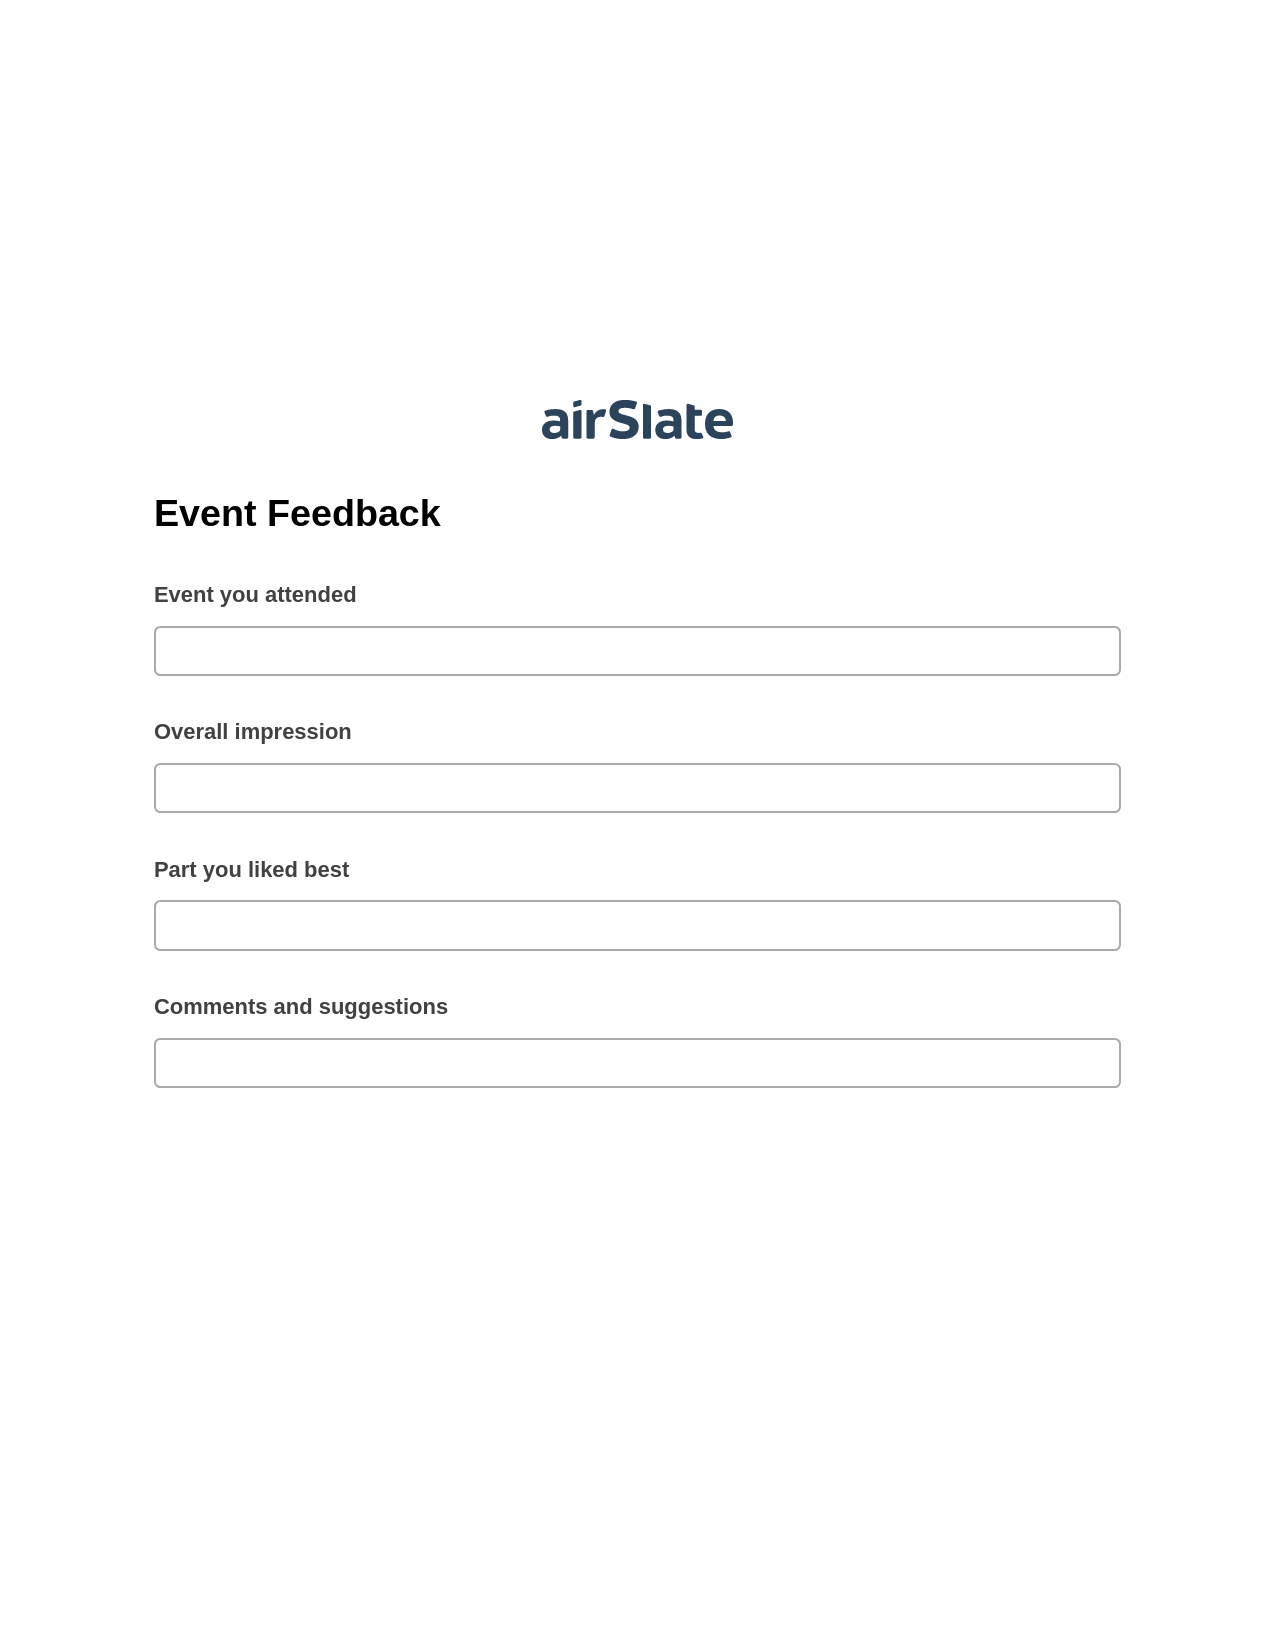 Event Feedback Pre-fill Slate from MS Dynamics 365 Records Bot, Assign Slate Name Bot, Export to Google Sheet Bot